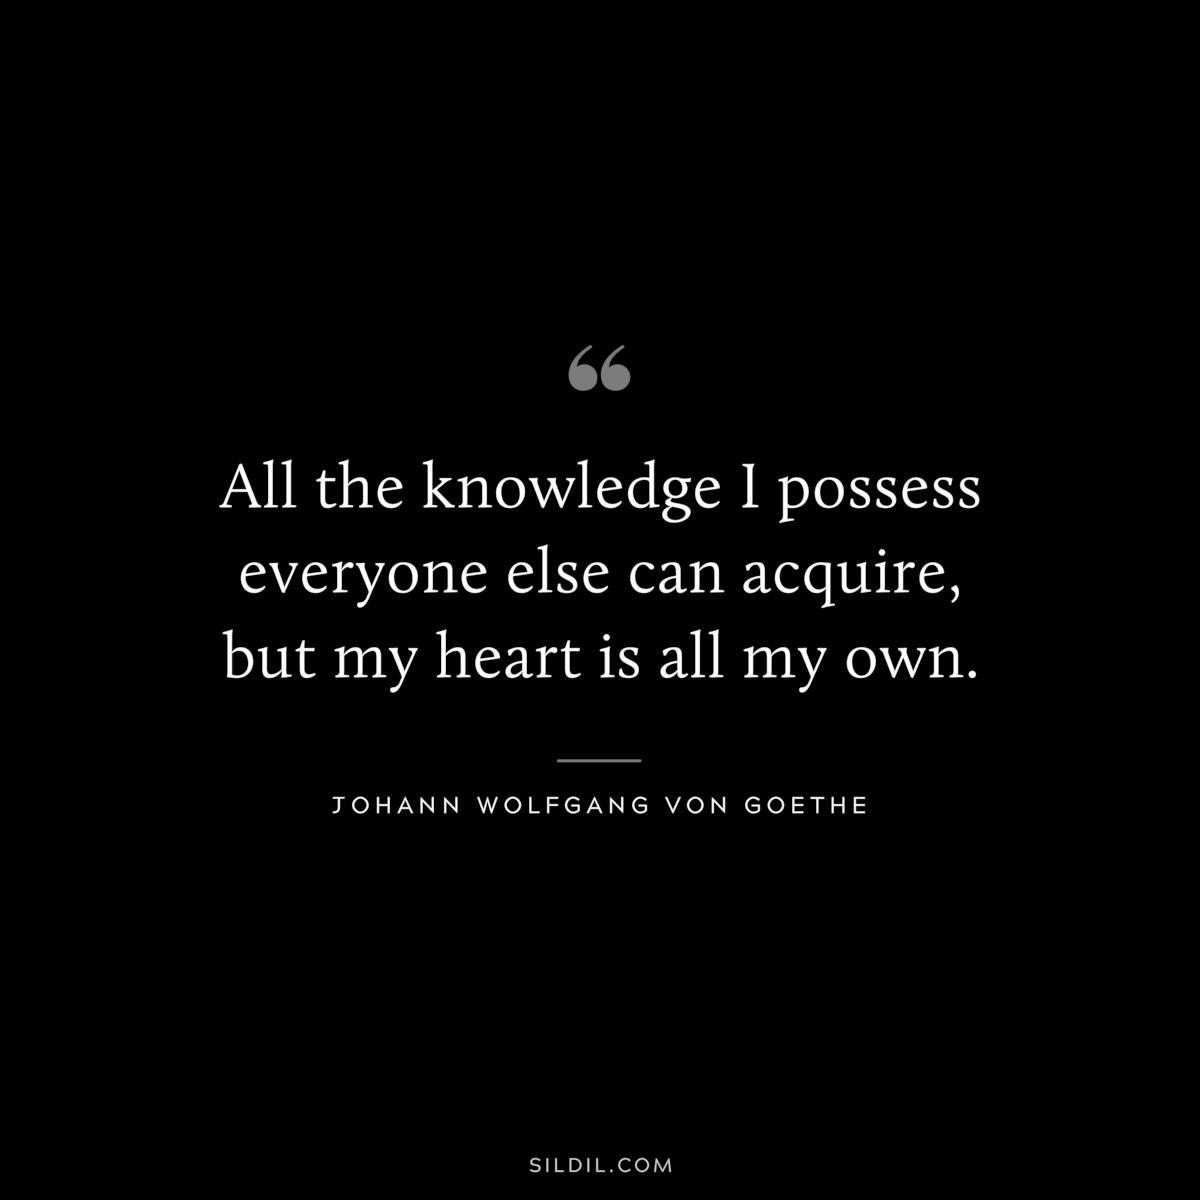 All the knowledge I possess everyone else can acquire, but my heart is all my own.― Johann Wolfgang von Goethe